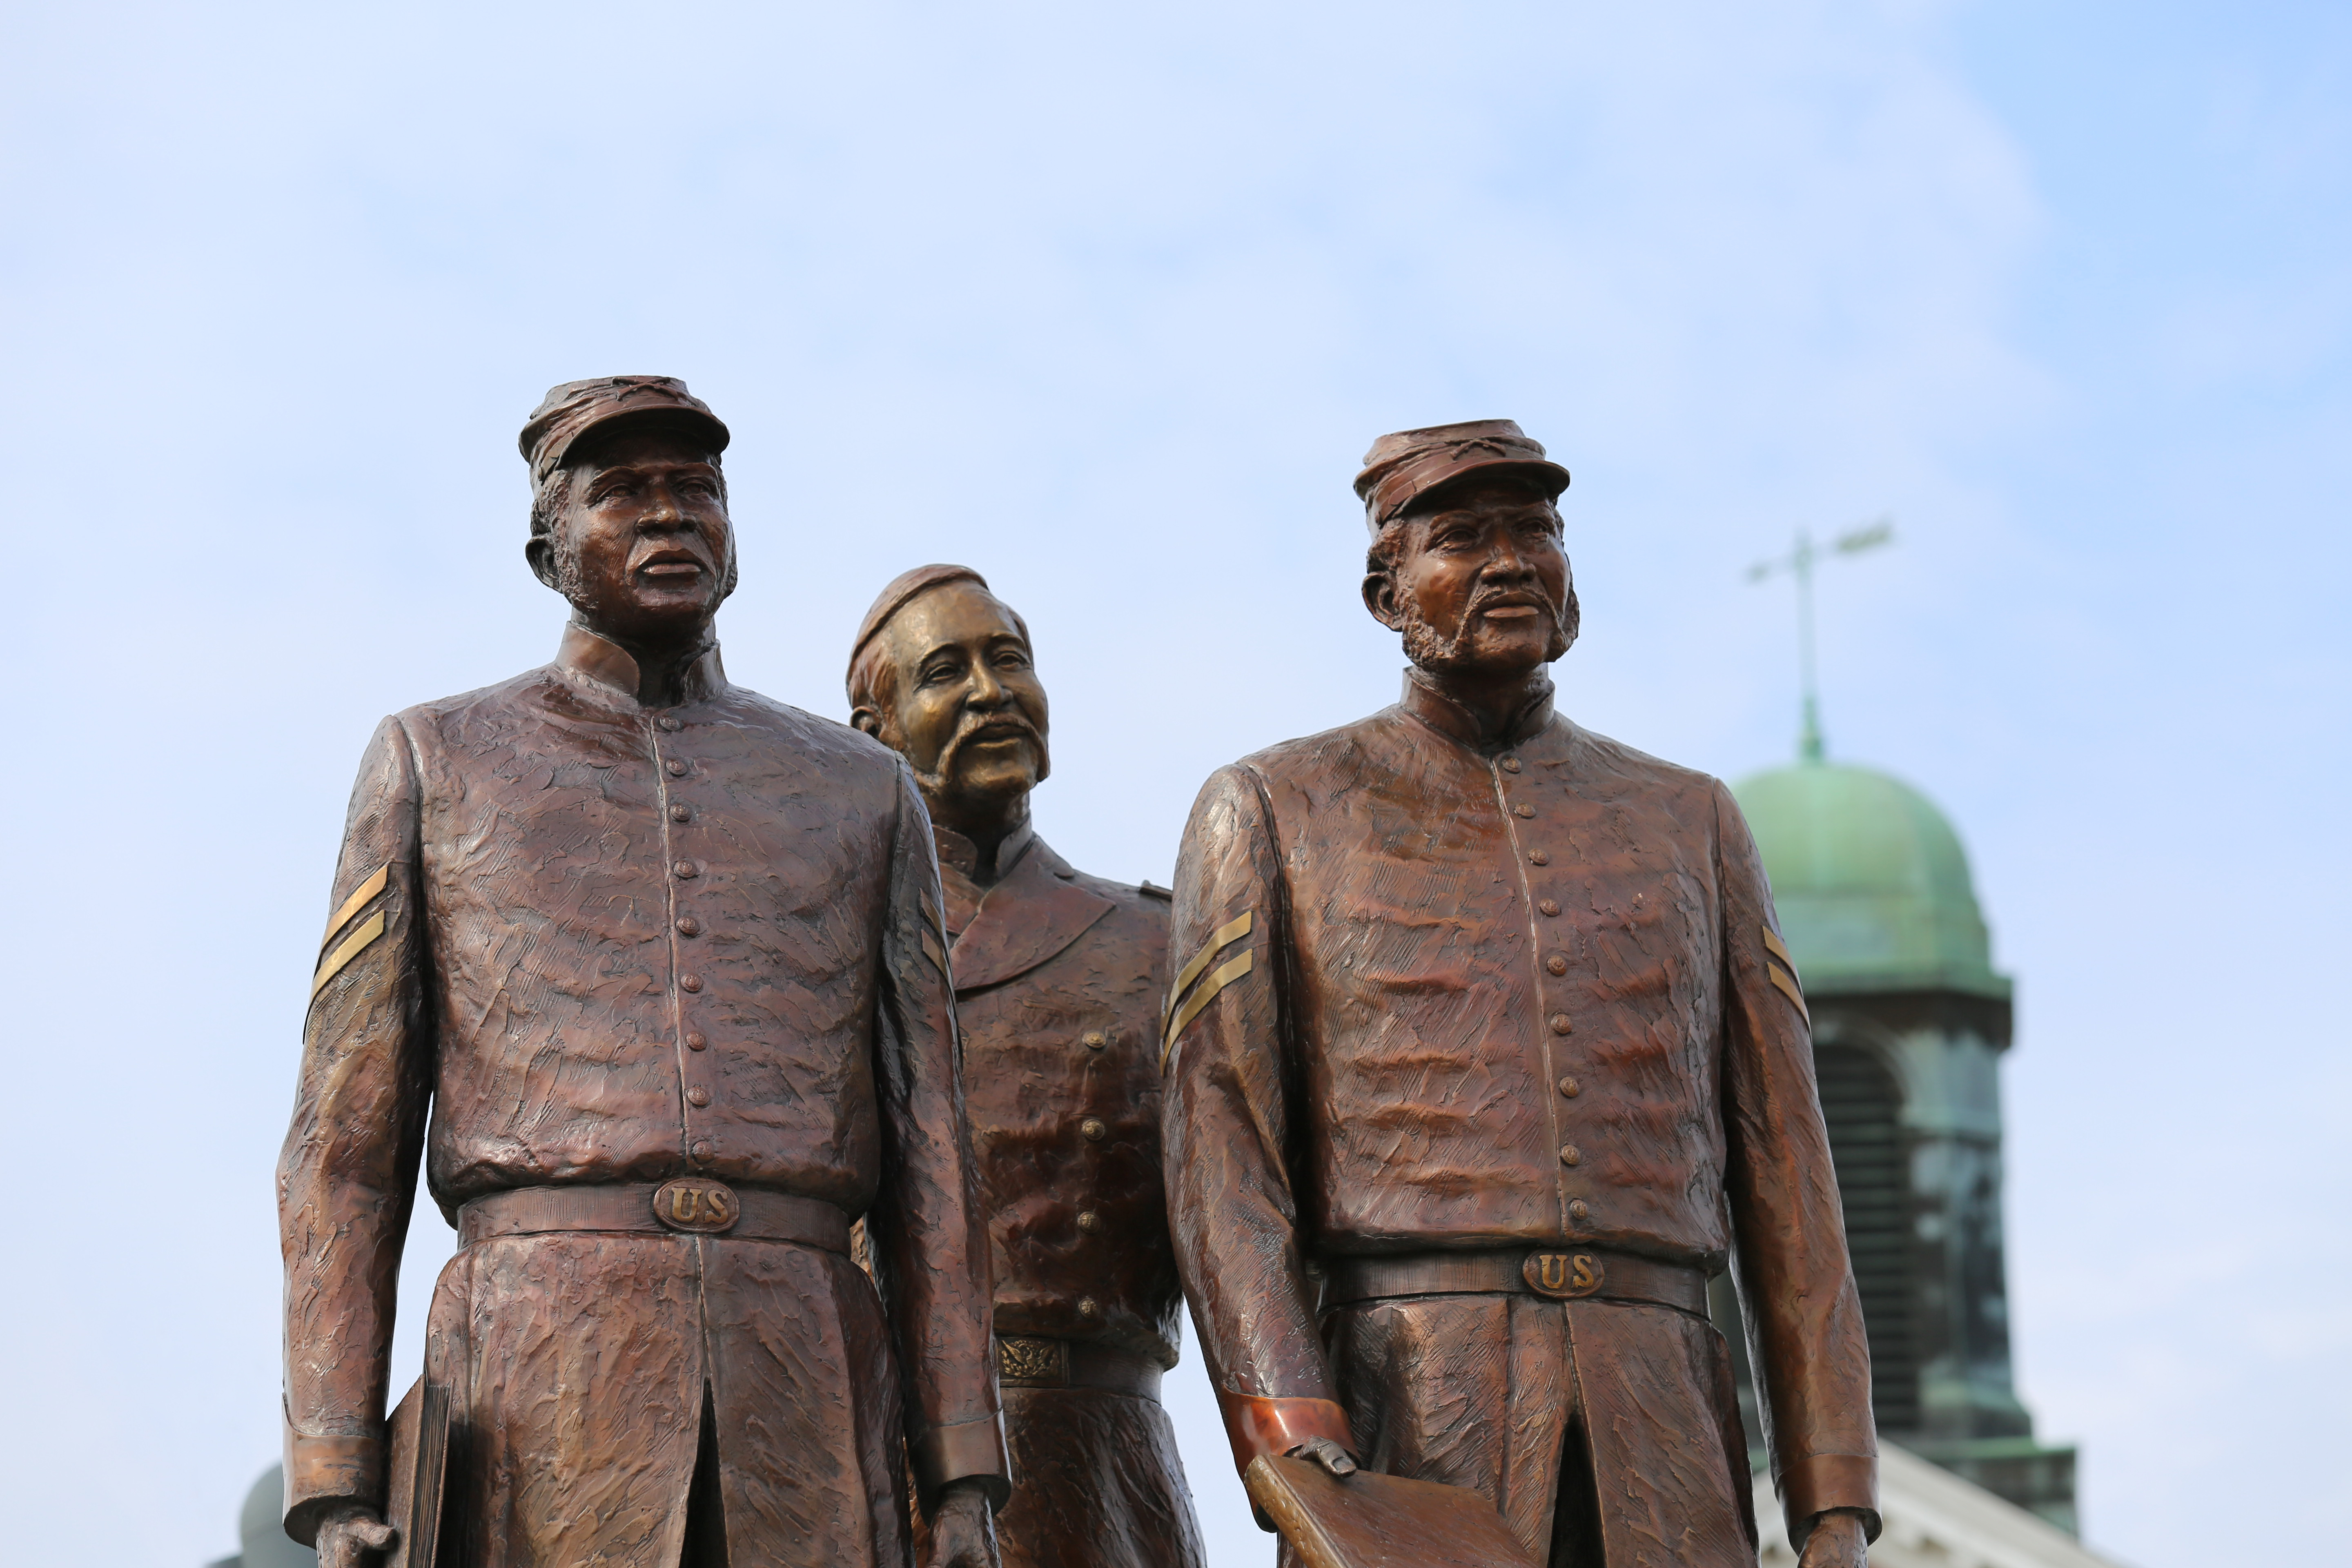 The Soldiers’ Memorial Plaza on Lincoln University of Missouri’s campus quadrangle pays artistic tribute to the vision of the men of the 62nd and 65th Regiments and the embodiment of their dream.